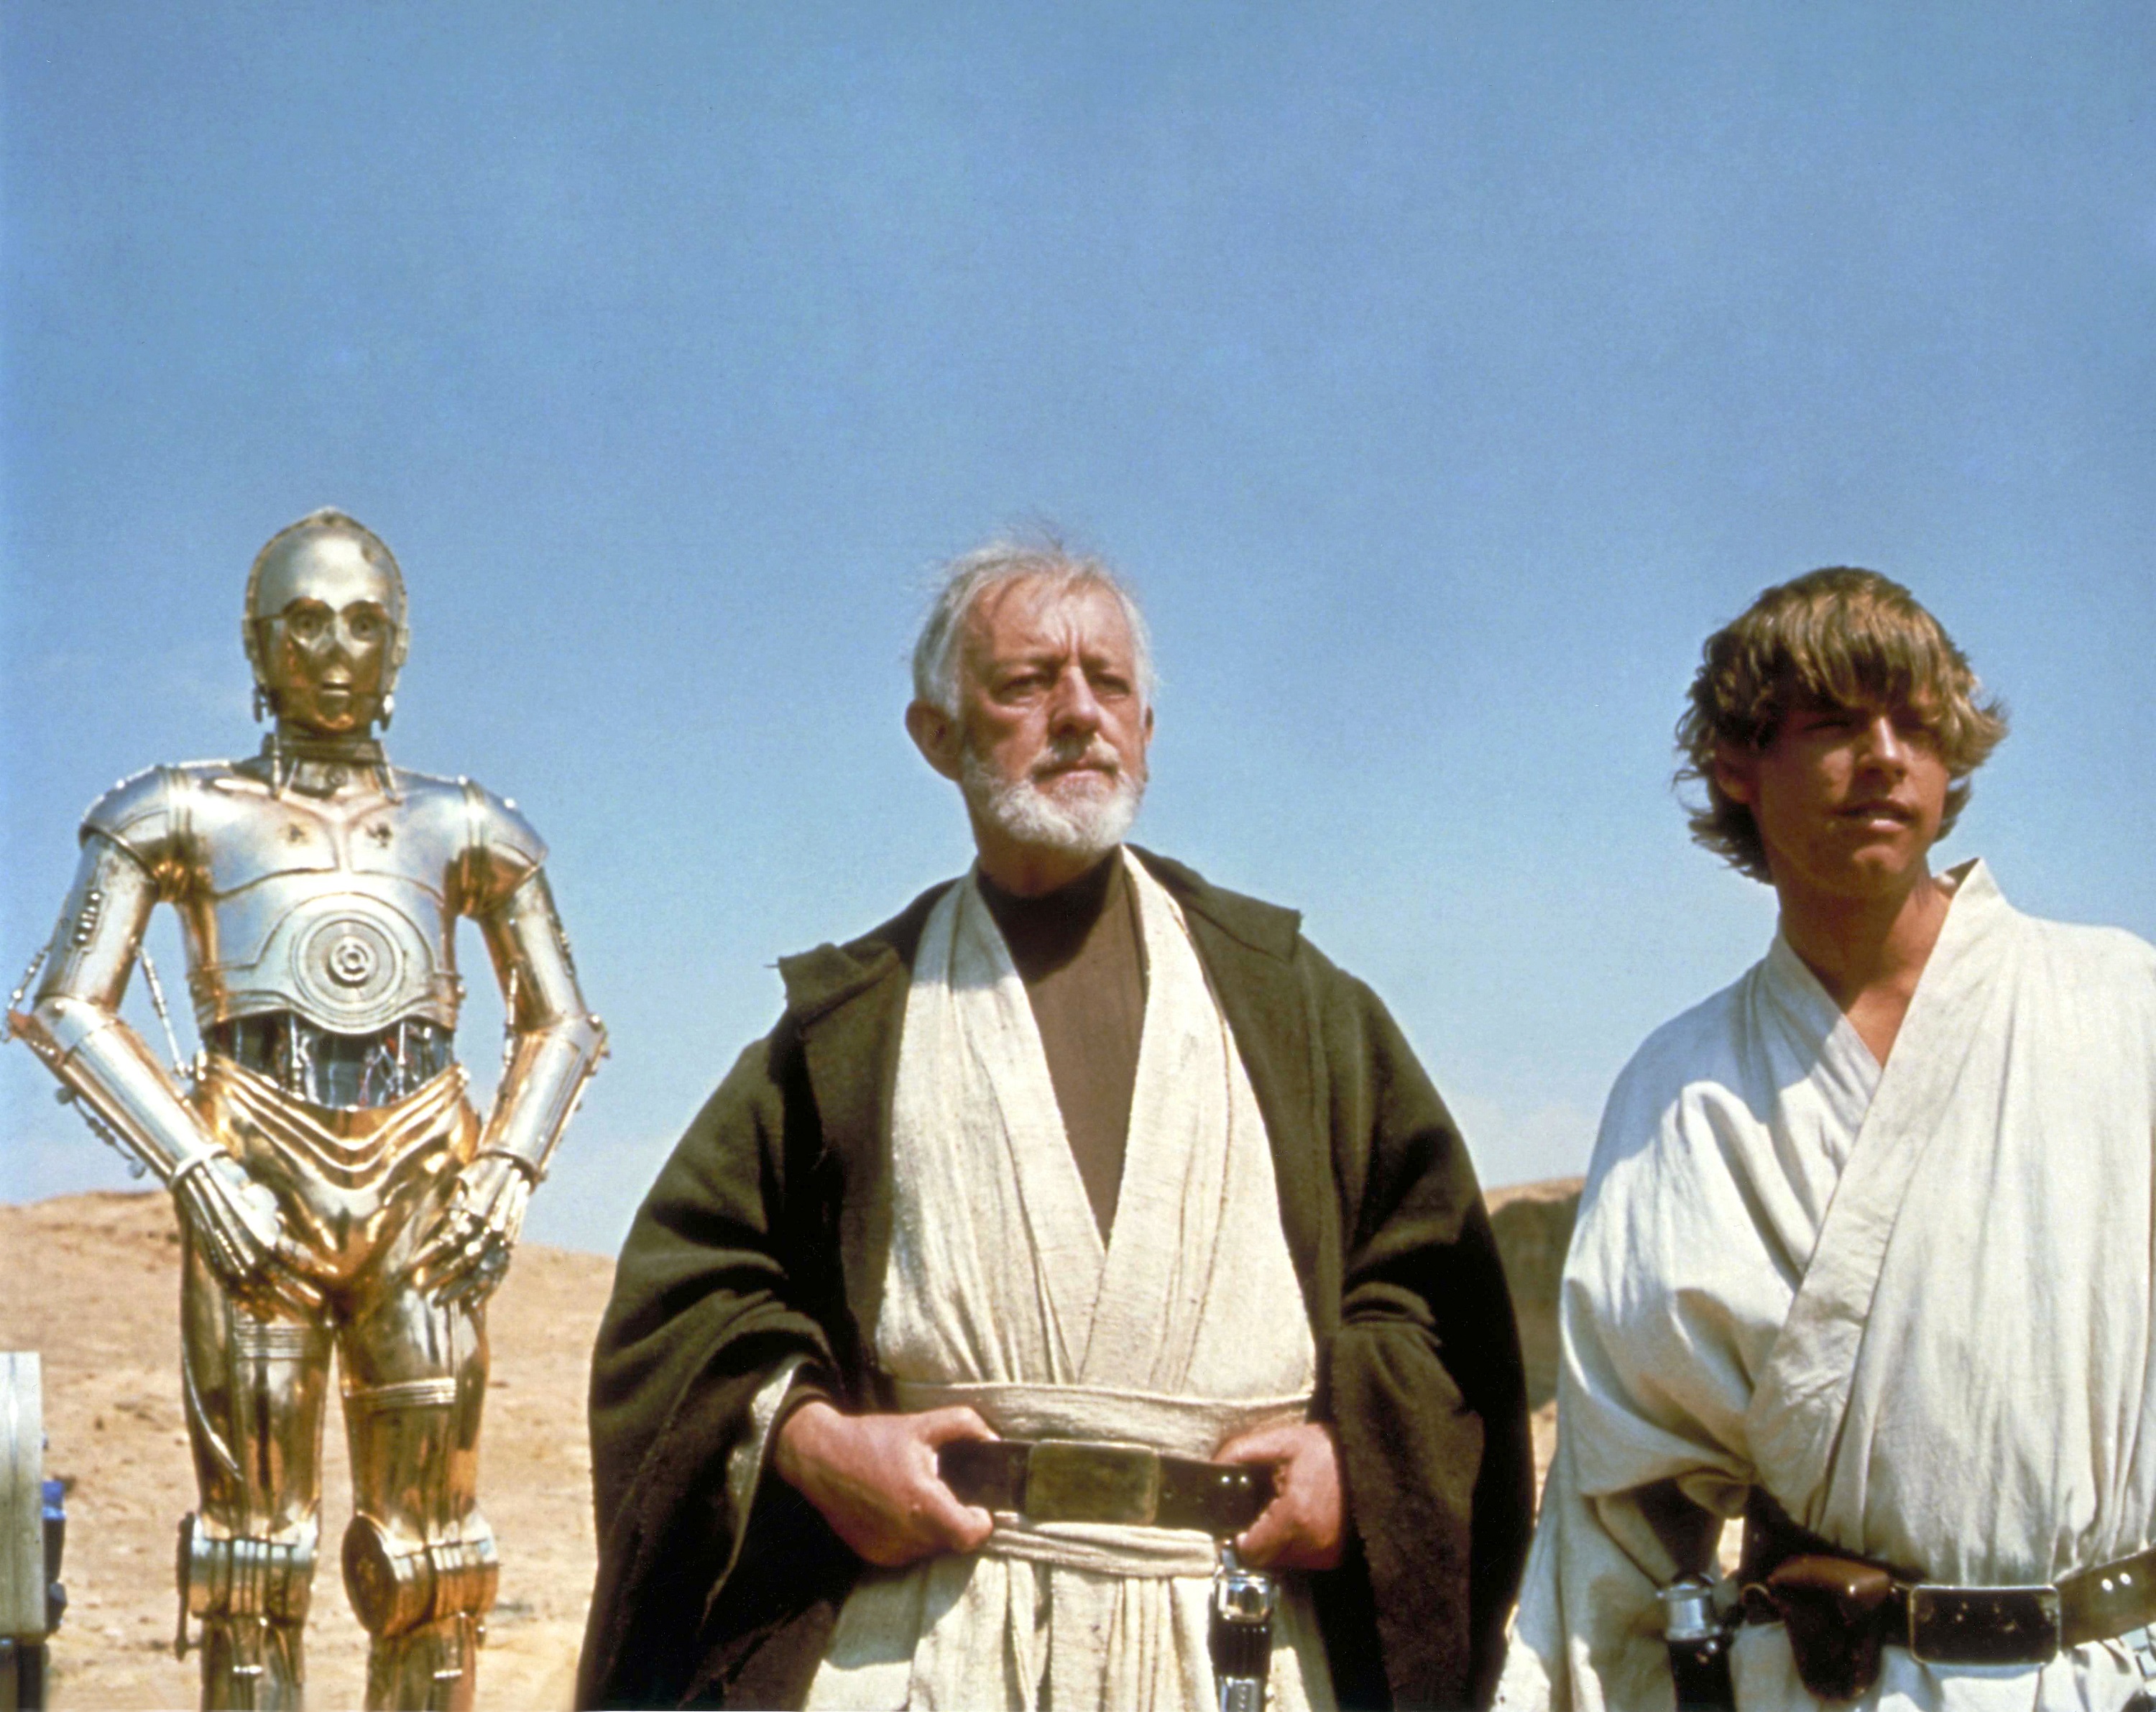 'Star Wars' actors Anthony Daniels, Alec Guinness, and Mark Hamill